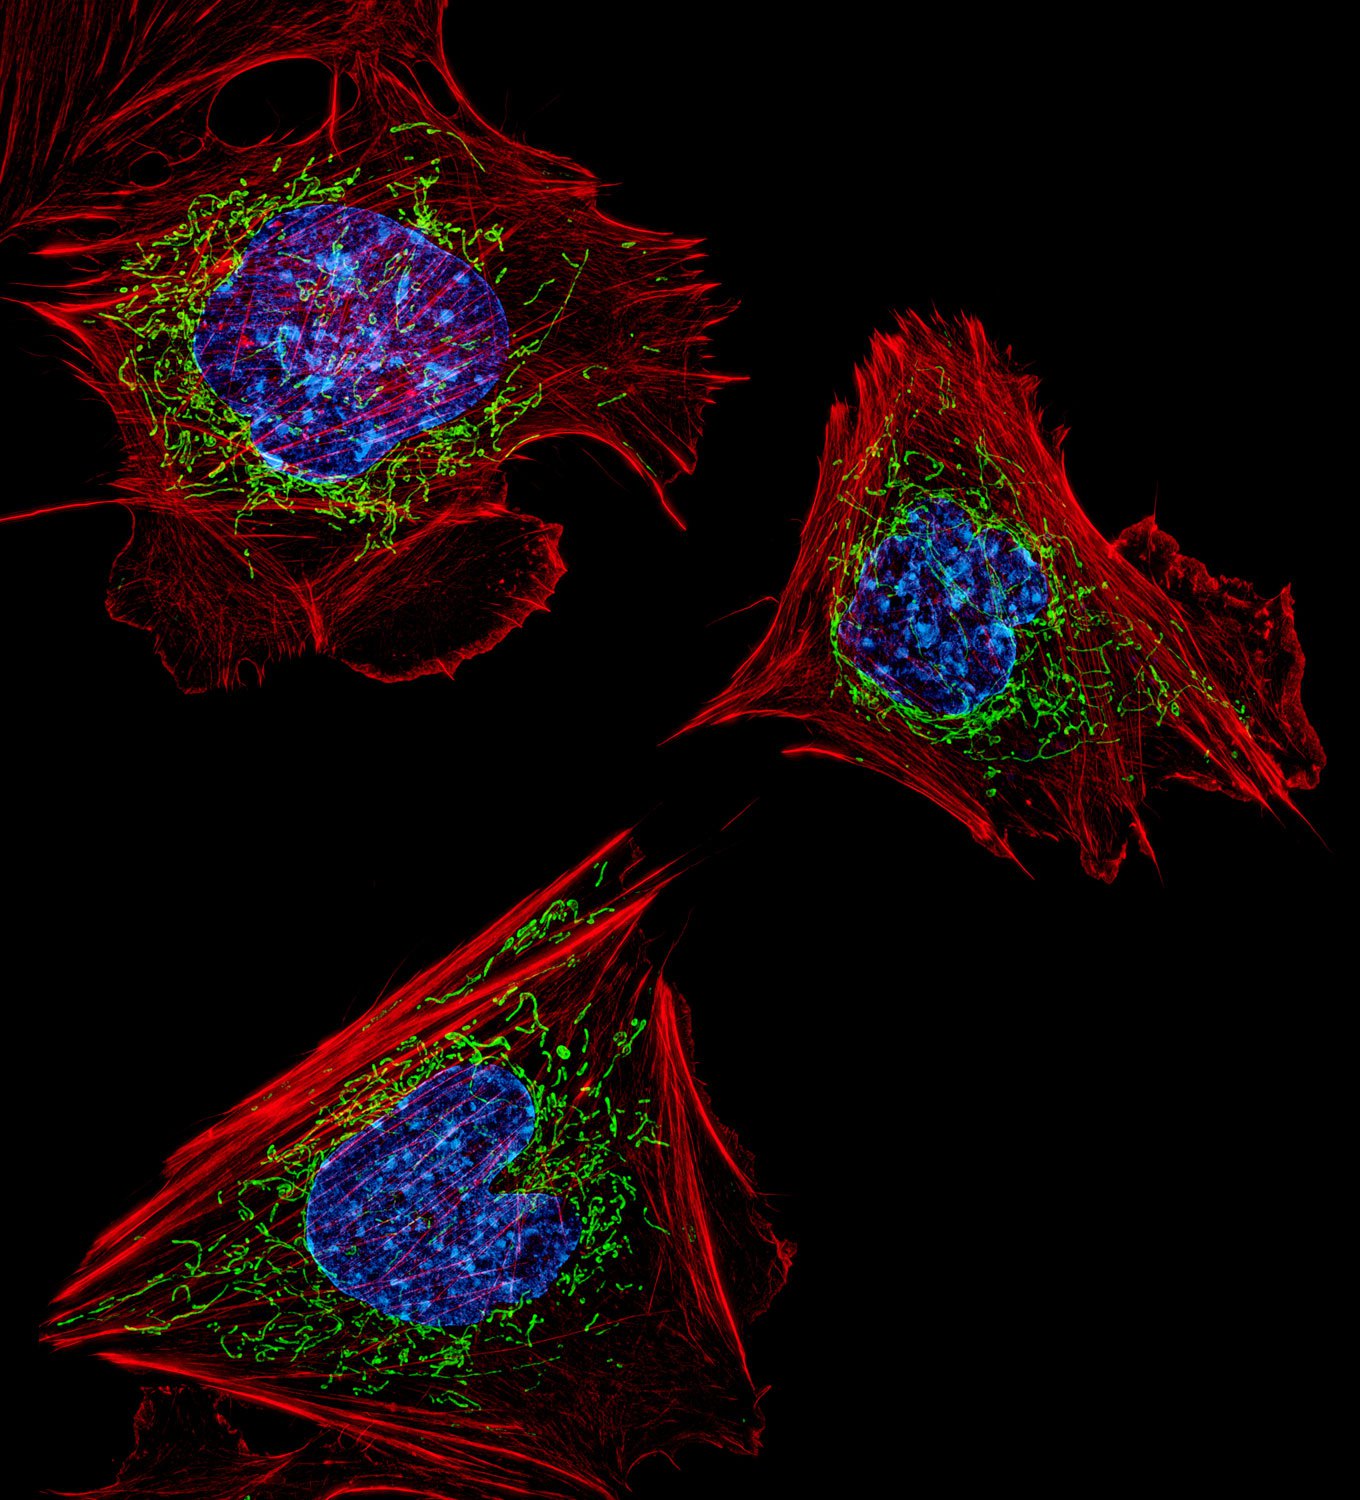 5th Place: Mouse embryonic fibroblasts showing the actin filaments (red) and DNA (blue).